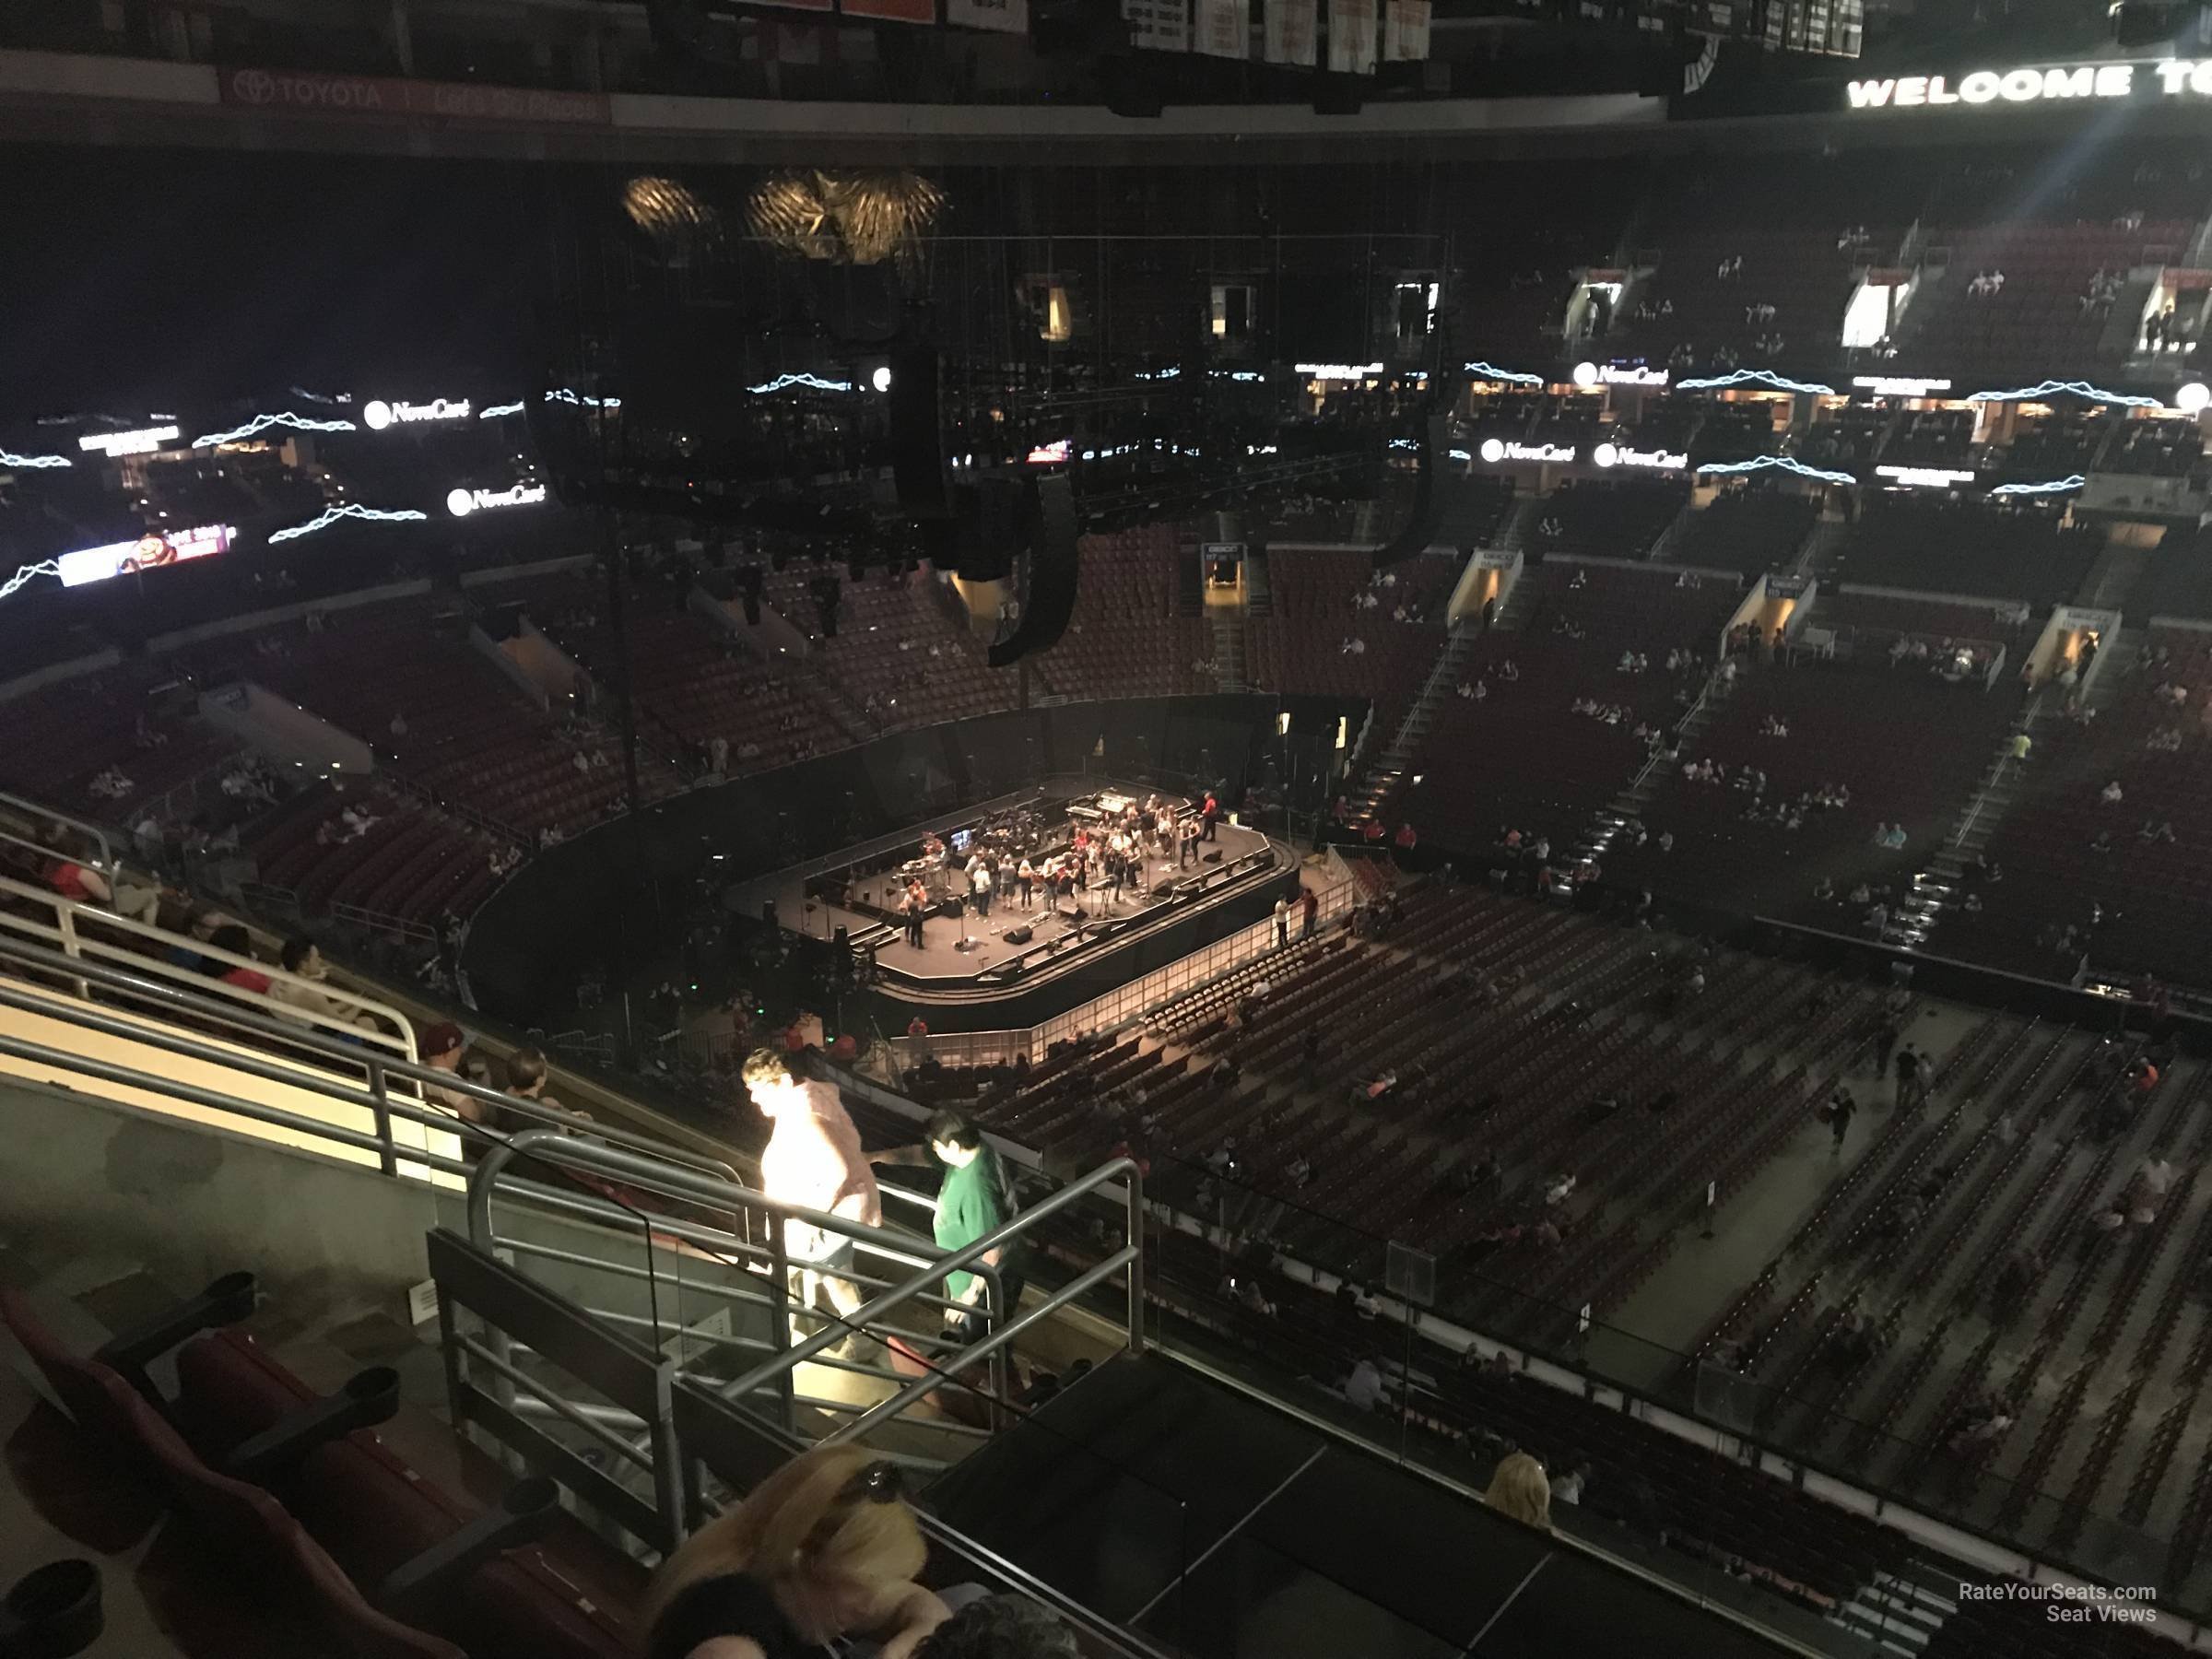 section 202, row 7 seat view  for concert - wells fargo center